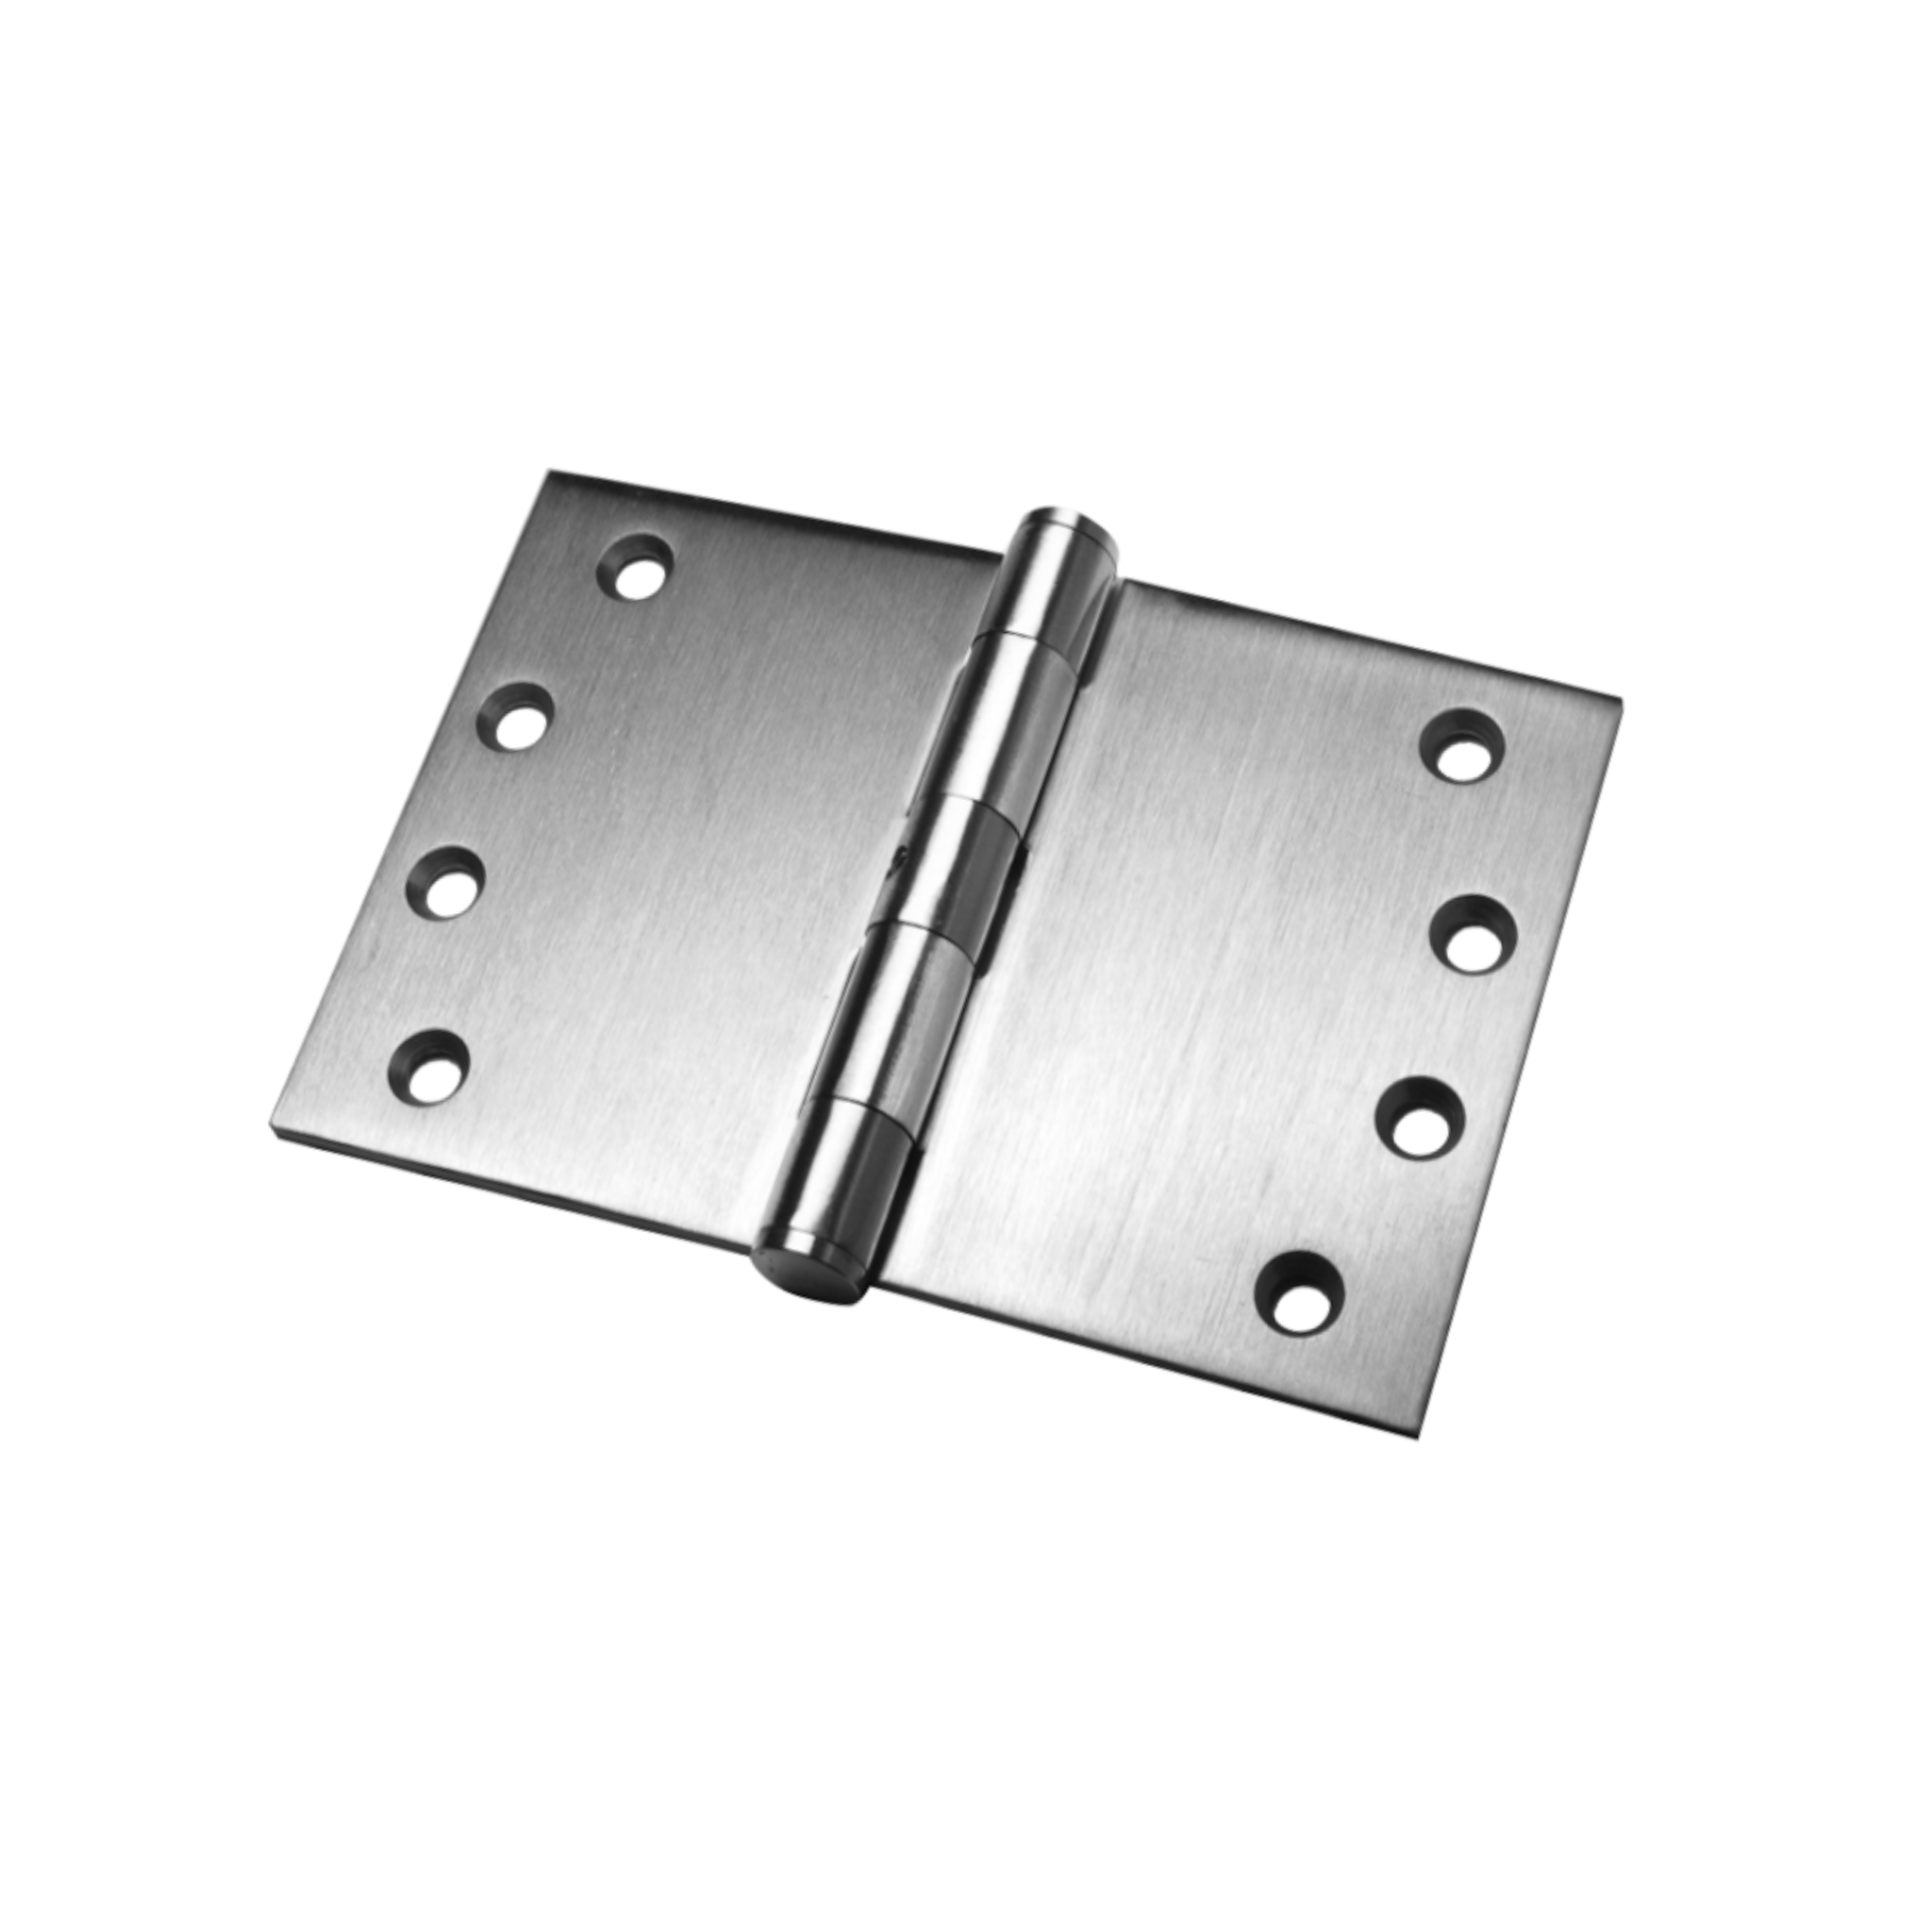 QS4412/3 200, Projection Hinge, 2 x Hinges (1 Pair), 100mm (h) x 200mm (w) x 3mm (t), Stainless Steel, QS